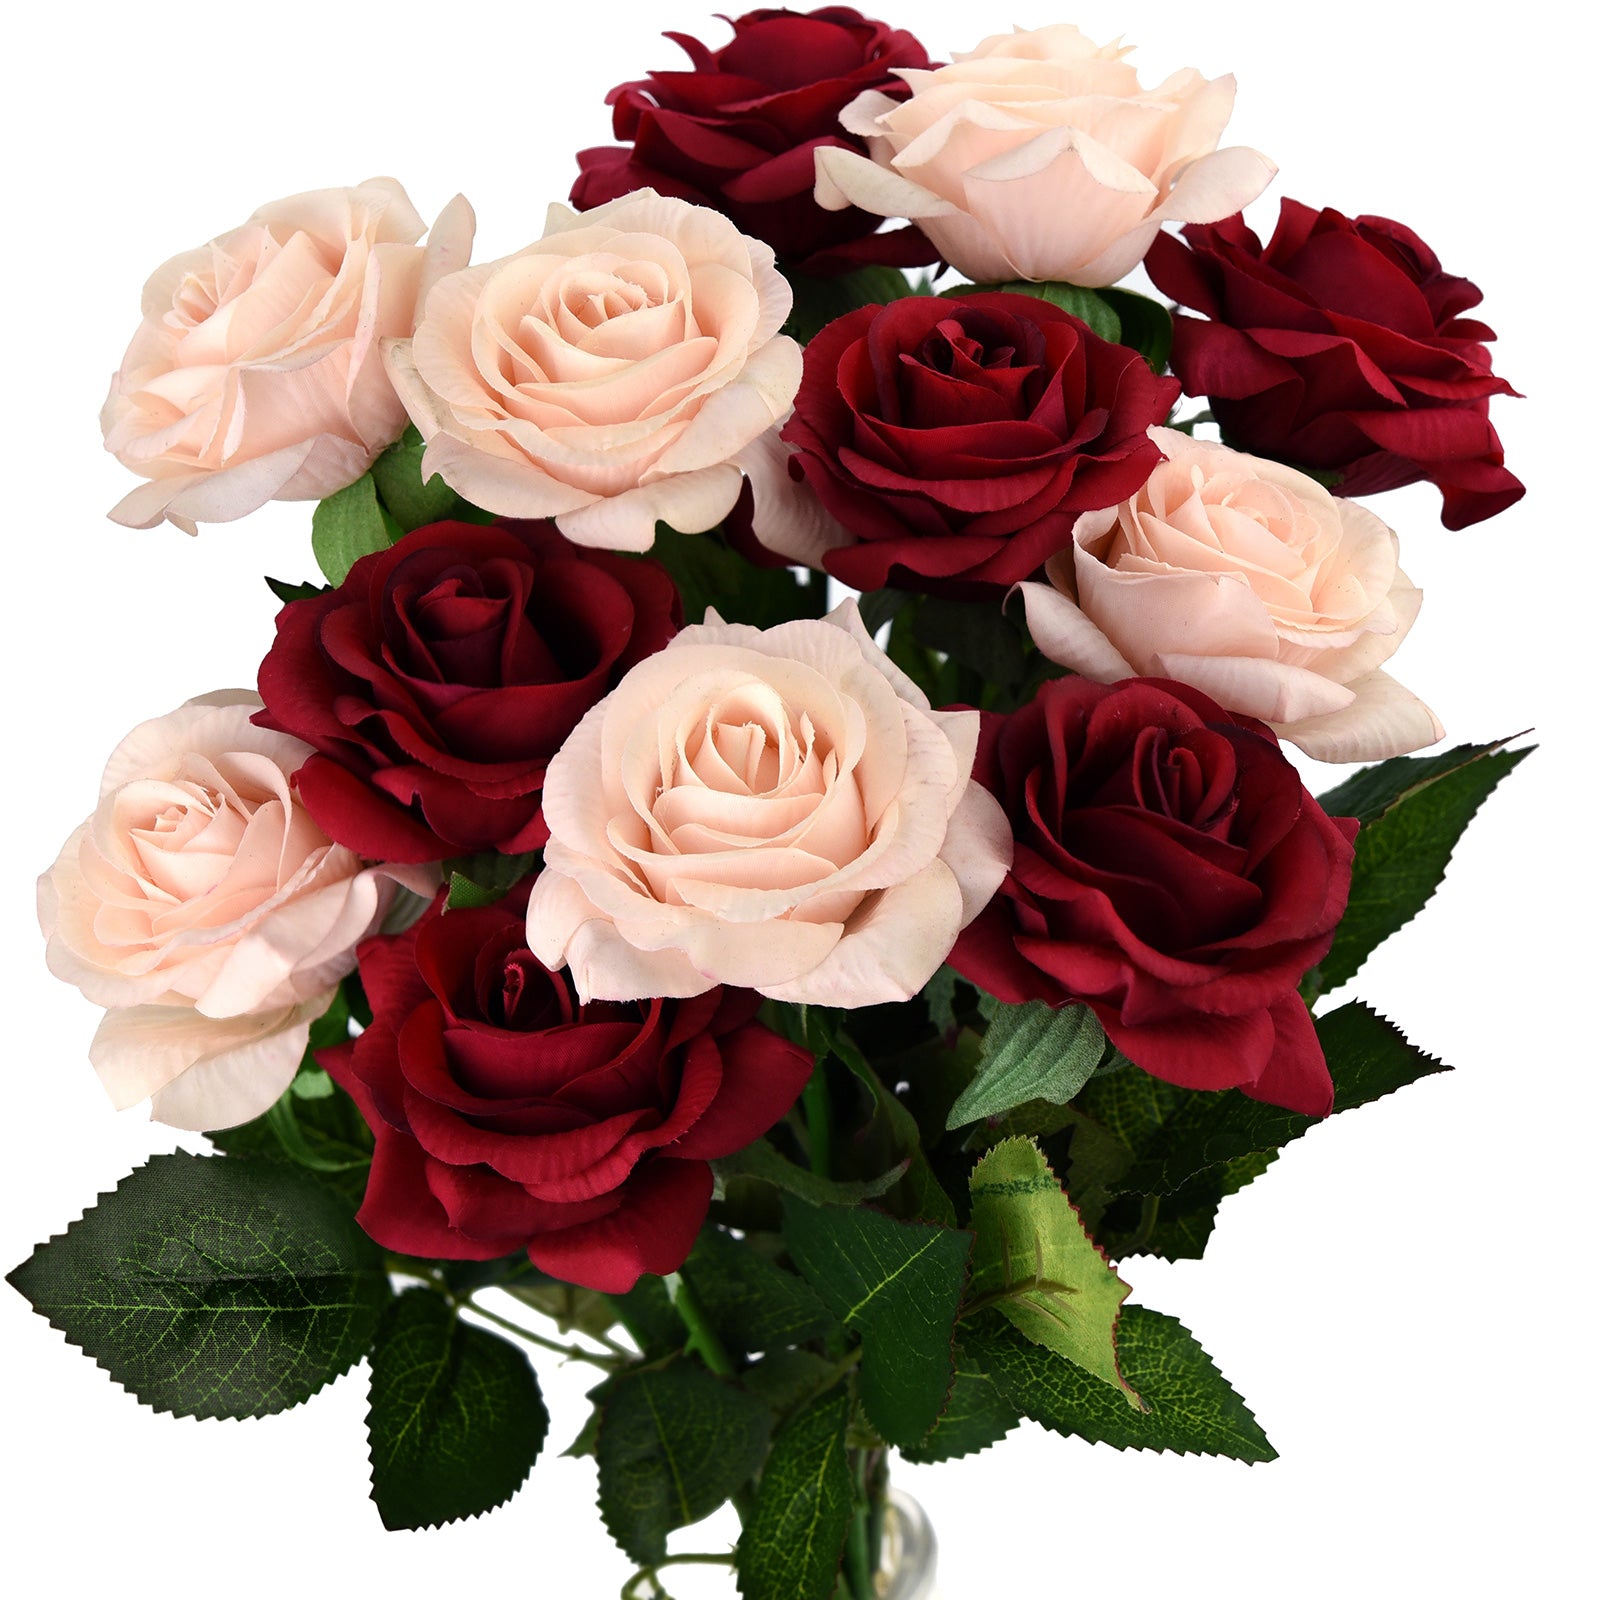 Real Touch 12 Stems "Pretty Charming" Mix Color Silk Artificial Roses Flowers ‘Petals Feel and Look like Fresh Roses'